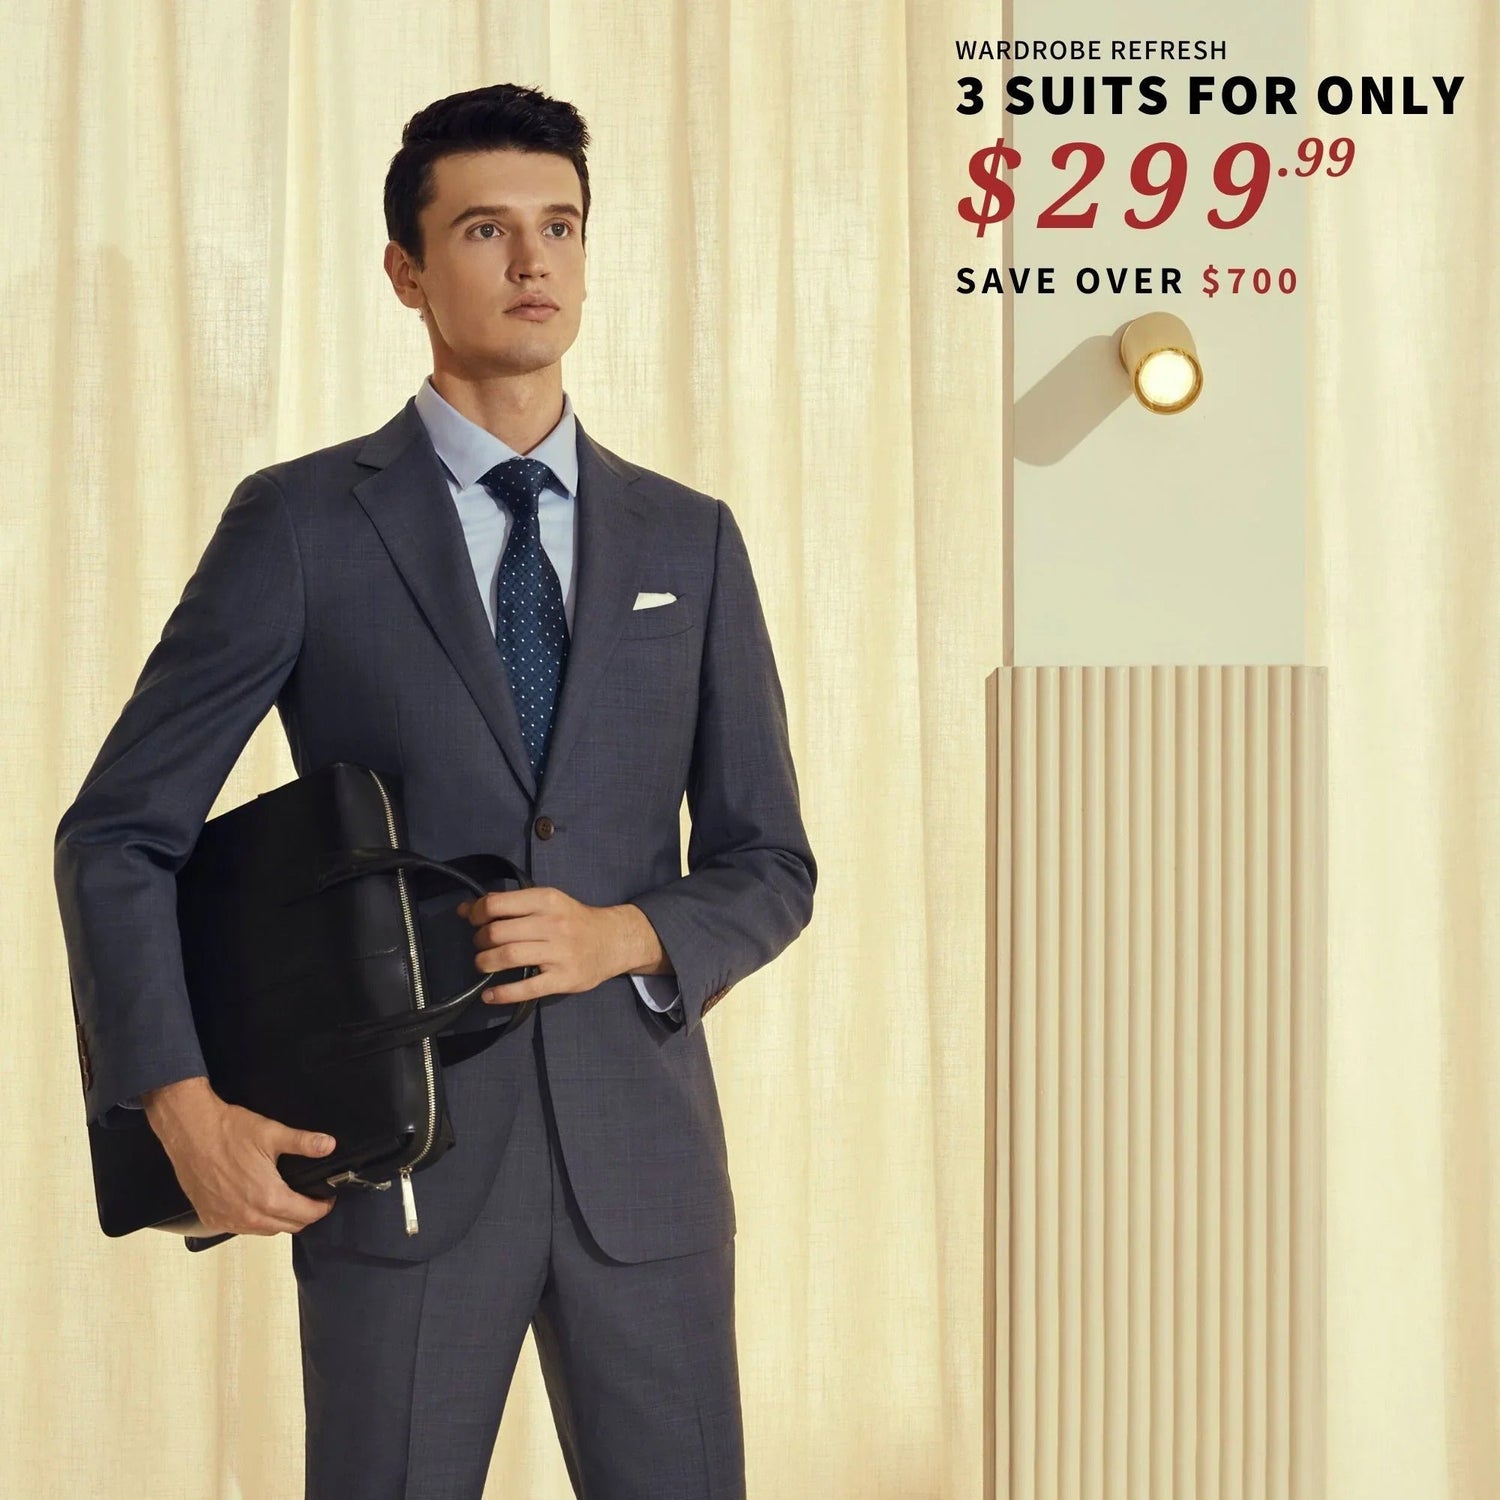 A man in a BYOB suit is holding a briefcase.